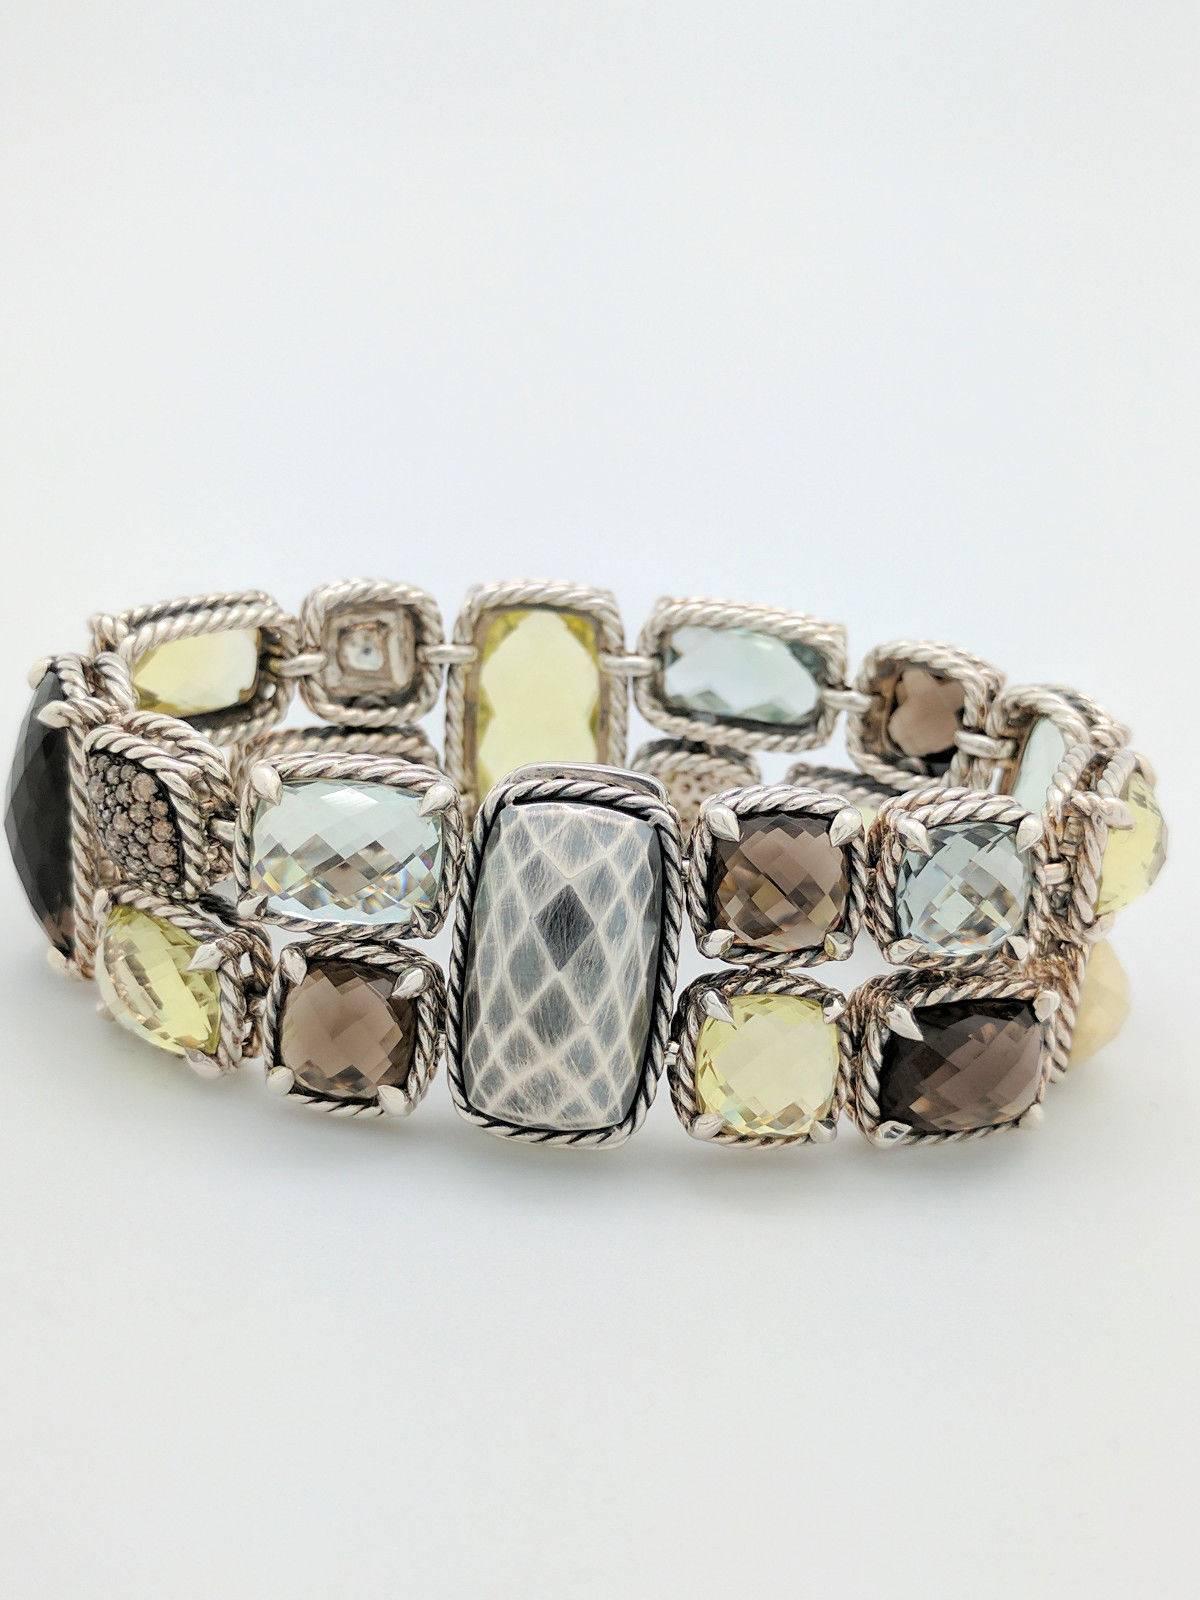 You are viewing a stunning and extremely rare David Yurman Metallic Mosaic Bracelet from the Chatelaine Collection.

This gorgeous David Yurman sterling silver and gemstone bracelet is an elegant and classic piece that will never go out of